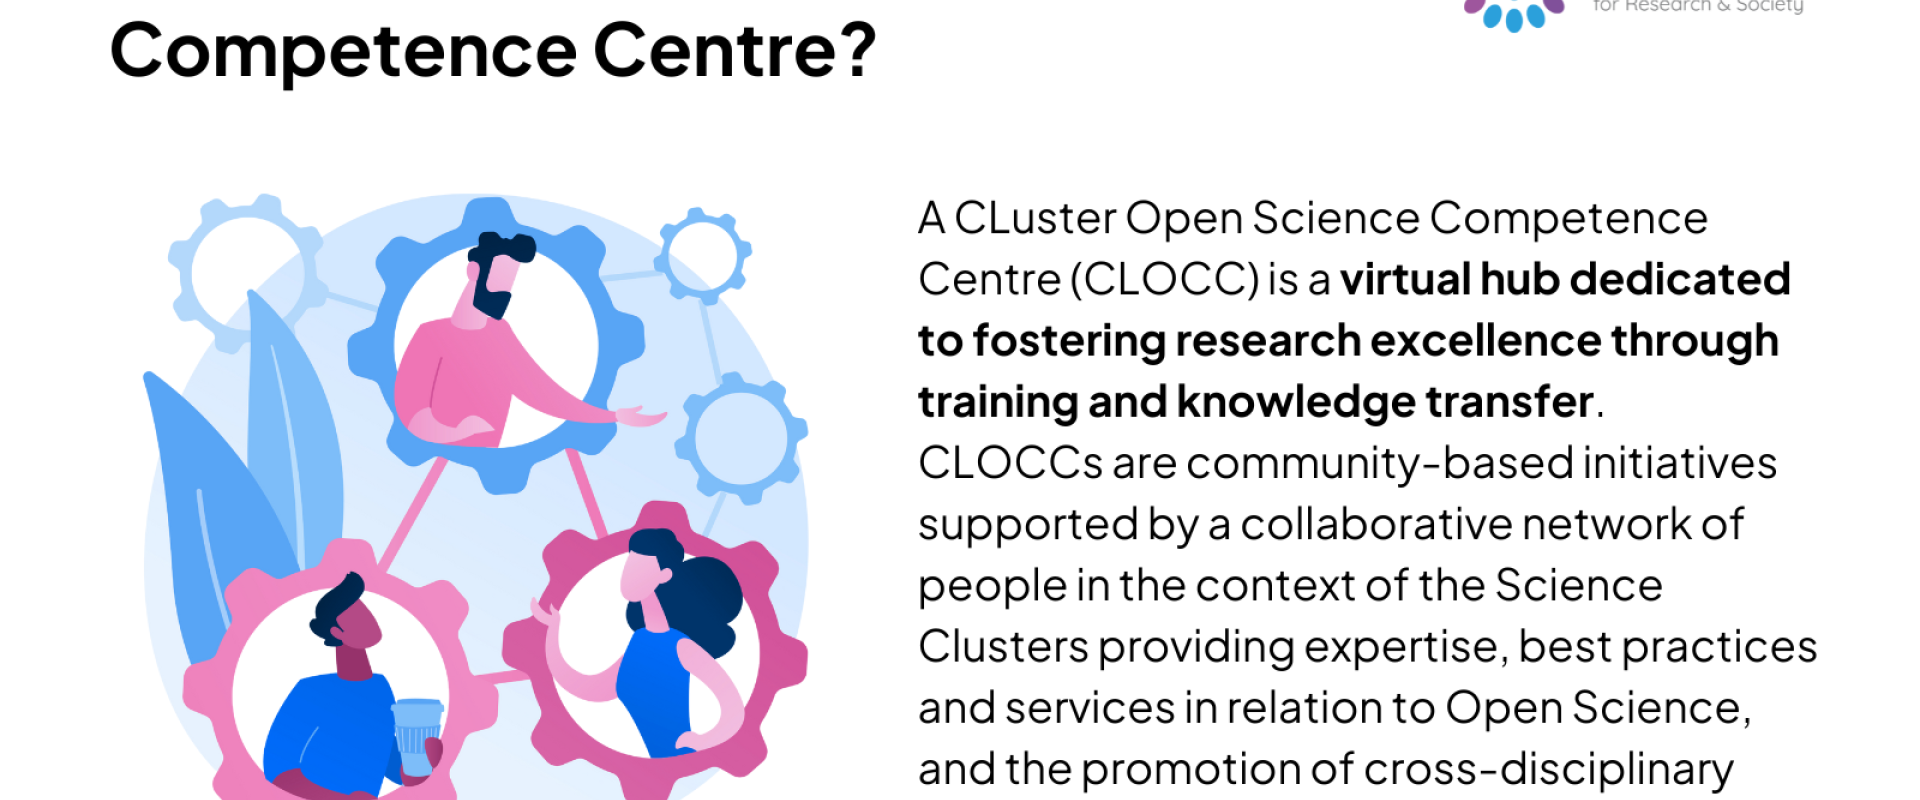 CLOCC - Cluster Open Science Competence Centre